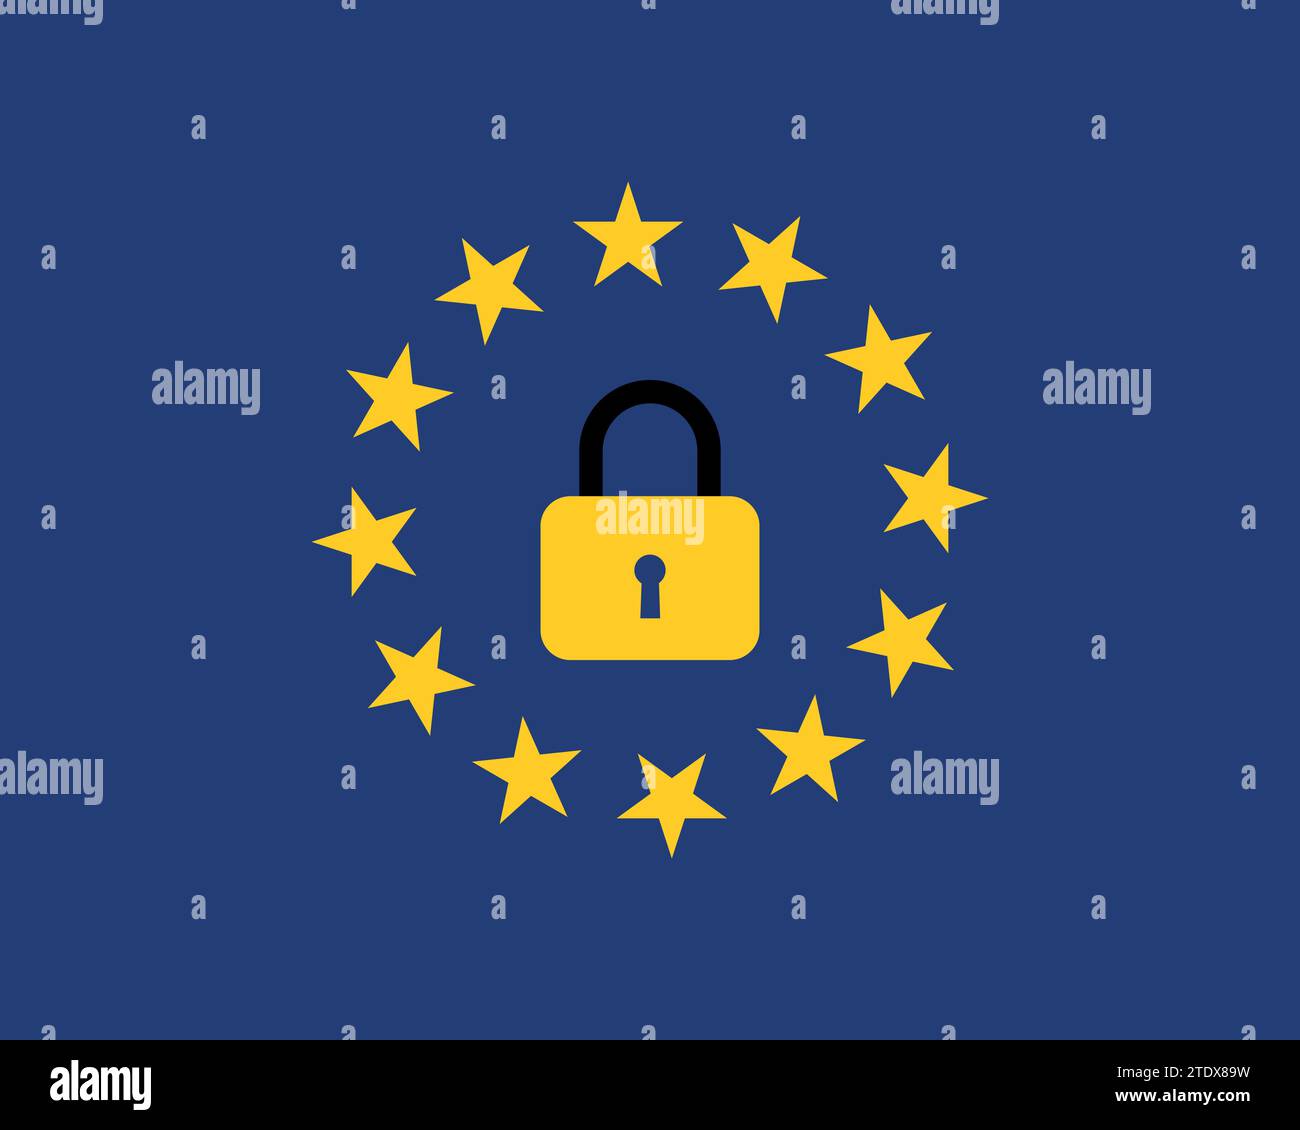 European union flag with a closed lock symbol stops emigration unauthorized signal vector illustration. Stock Vector